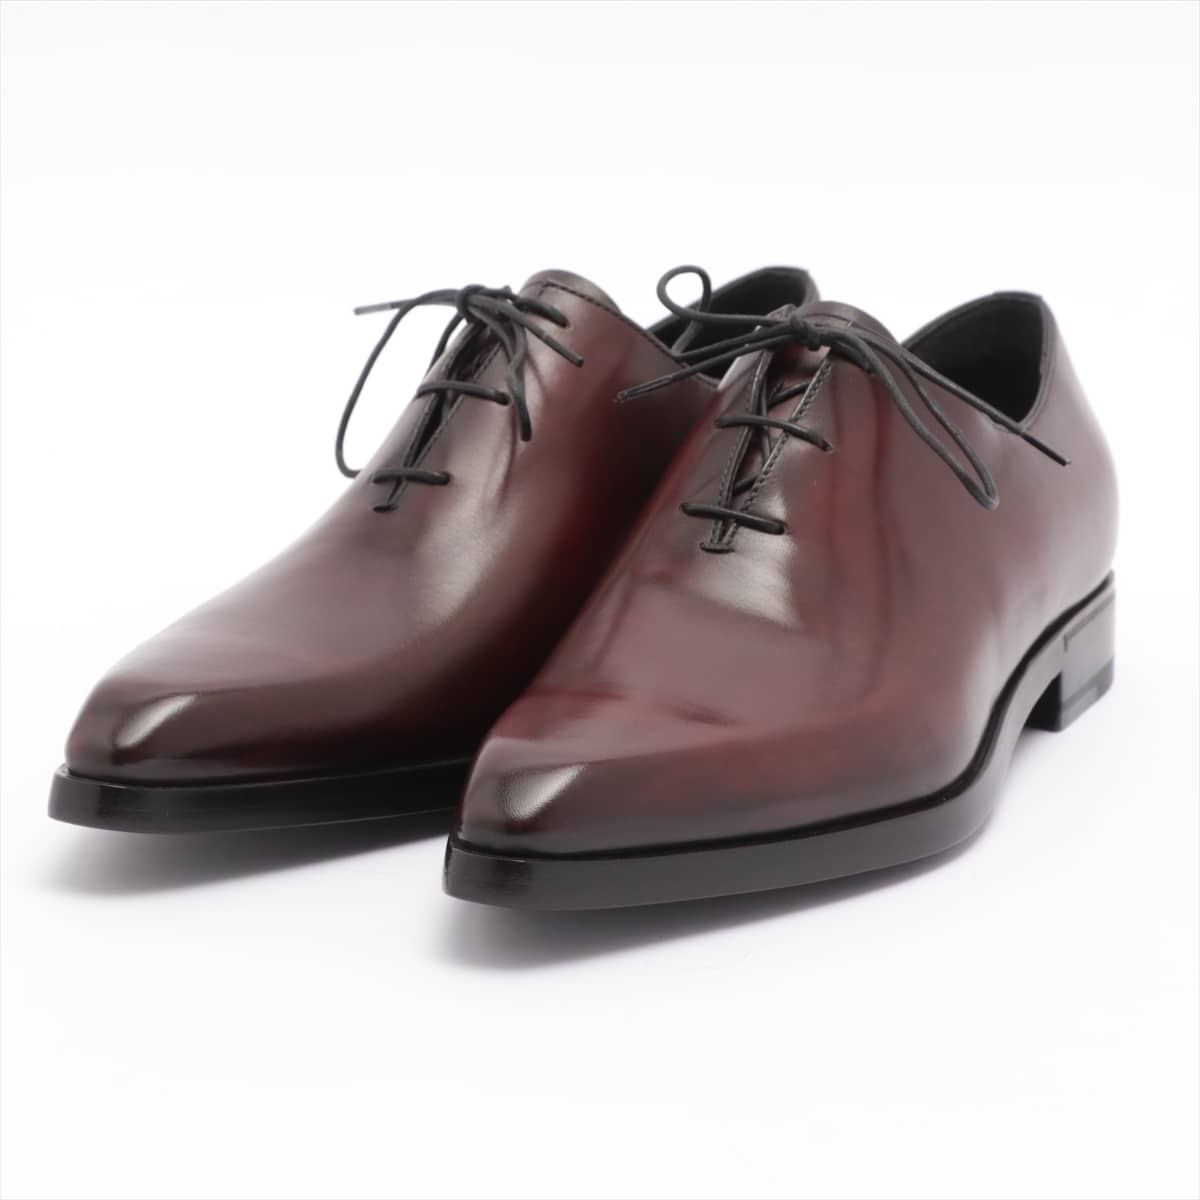 Berluti Alessandro Leather Leather shoes 6 Men's Bordeaux Hole cut Comes with genuine shoe keeper